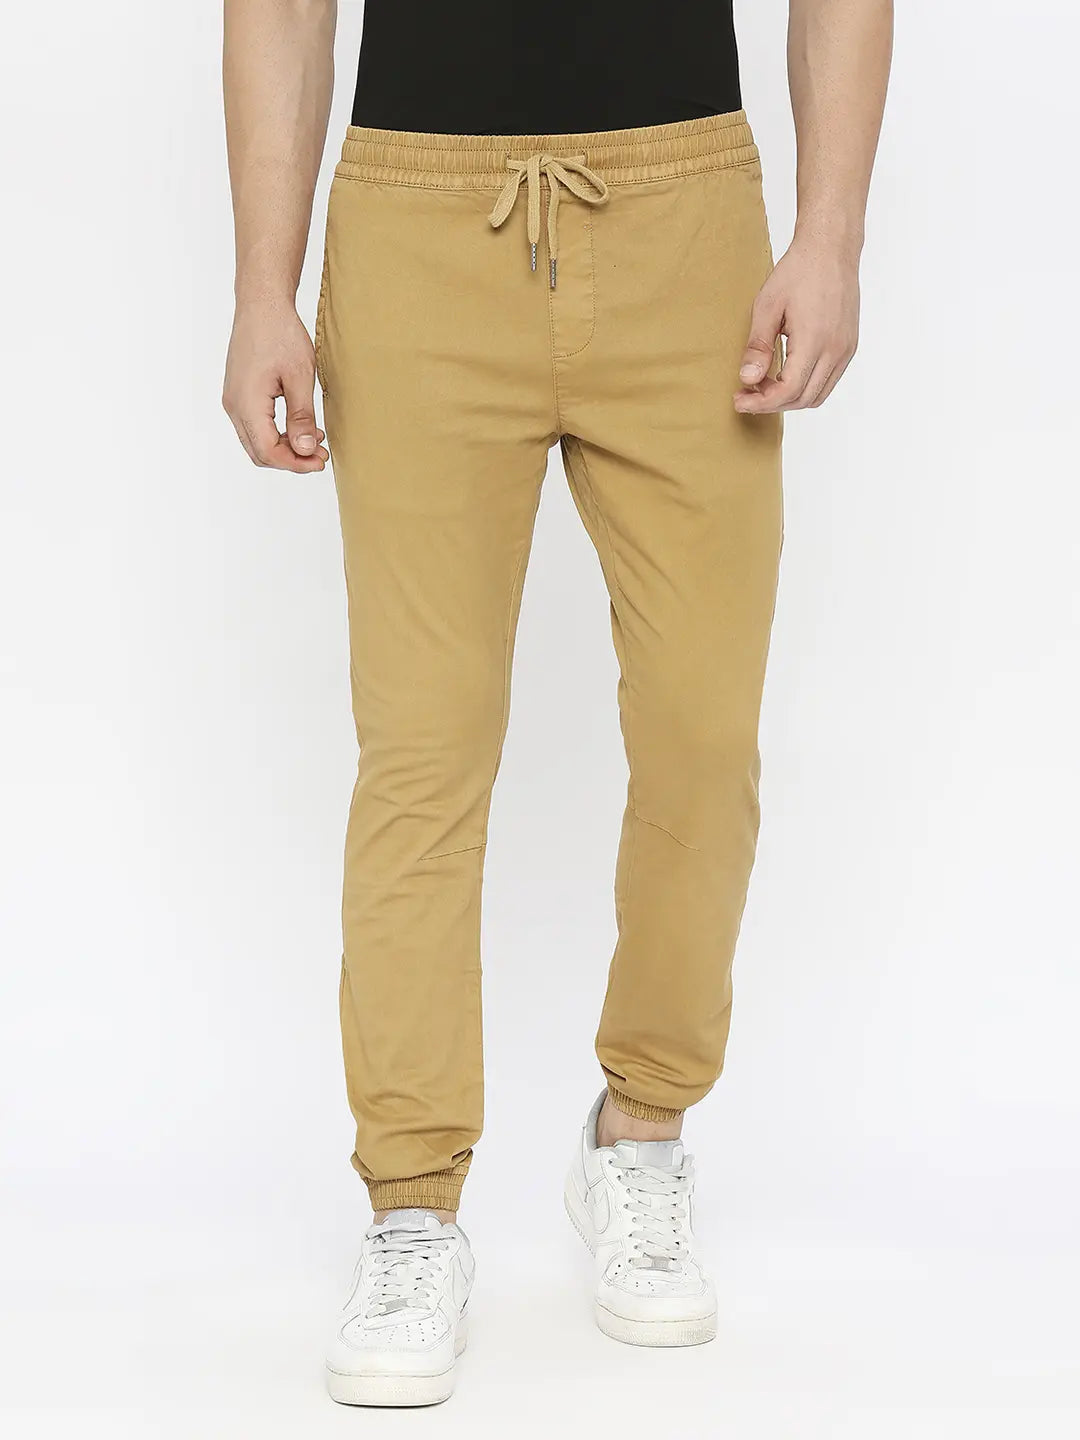 Casual Trousers  Buy branded Casual Trousers online cotton cotton blend  casual wear party wear Casual Trousers for Men at Limeroad